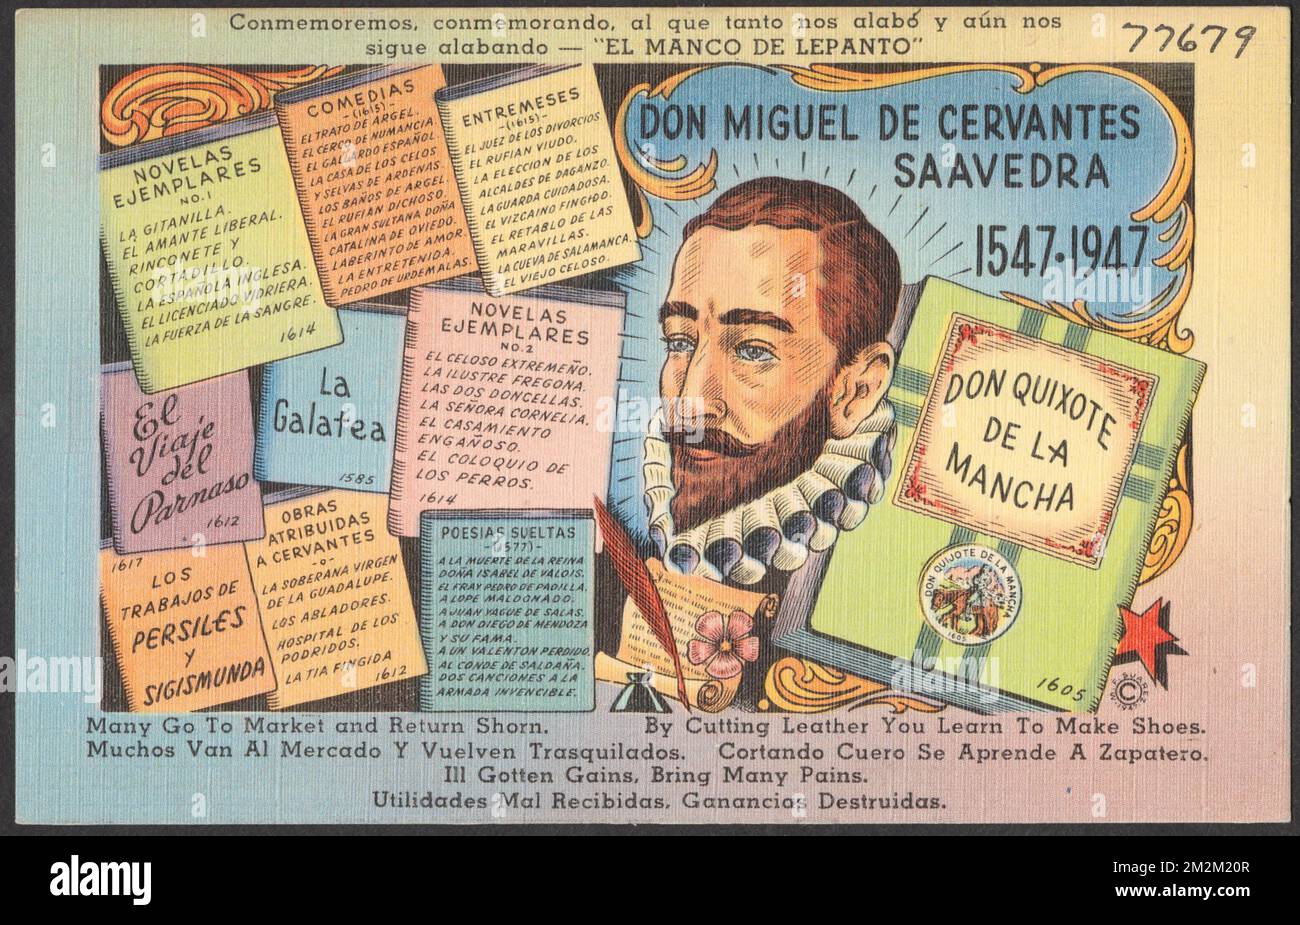 Don Miguel de Cervantes Saavedra 1547-1947 , Organizations, Cervantes Saavedra, Miguel de, 1547-1616, Tichnor Brothers Collection, postcards of the United States Stock Photo